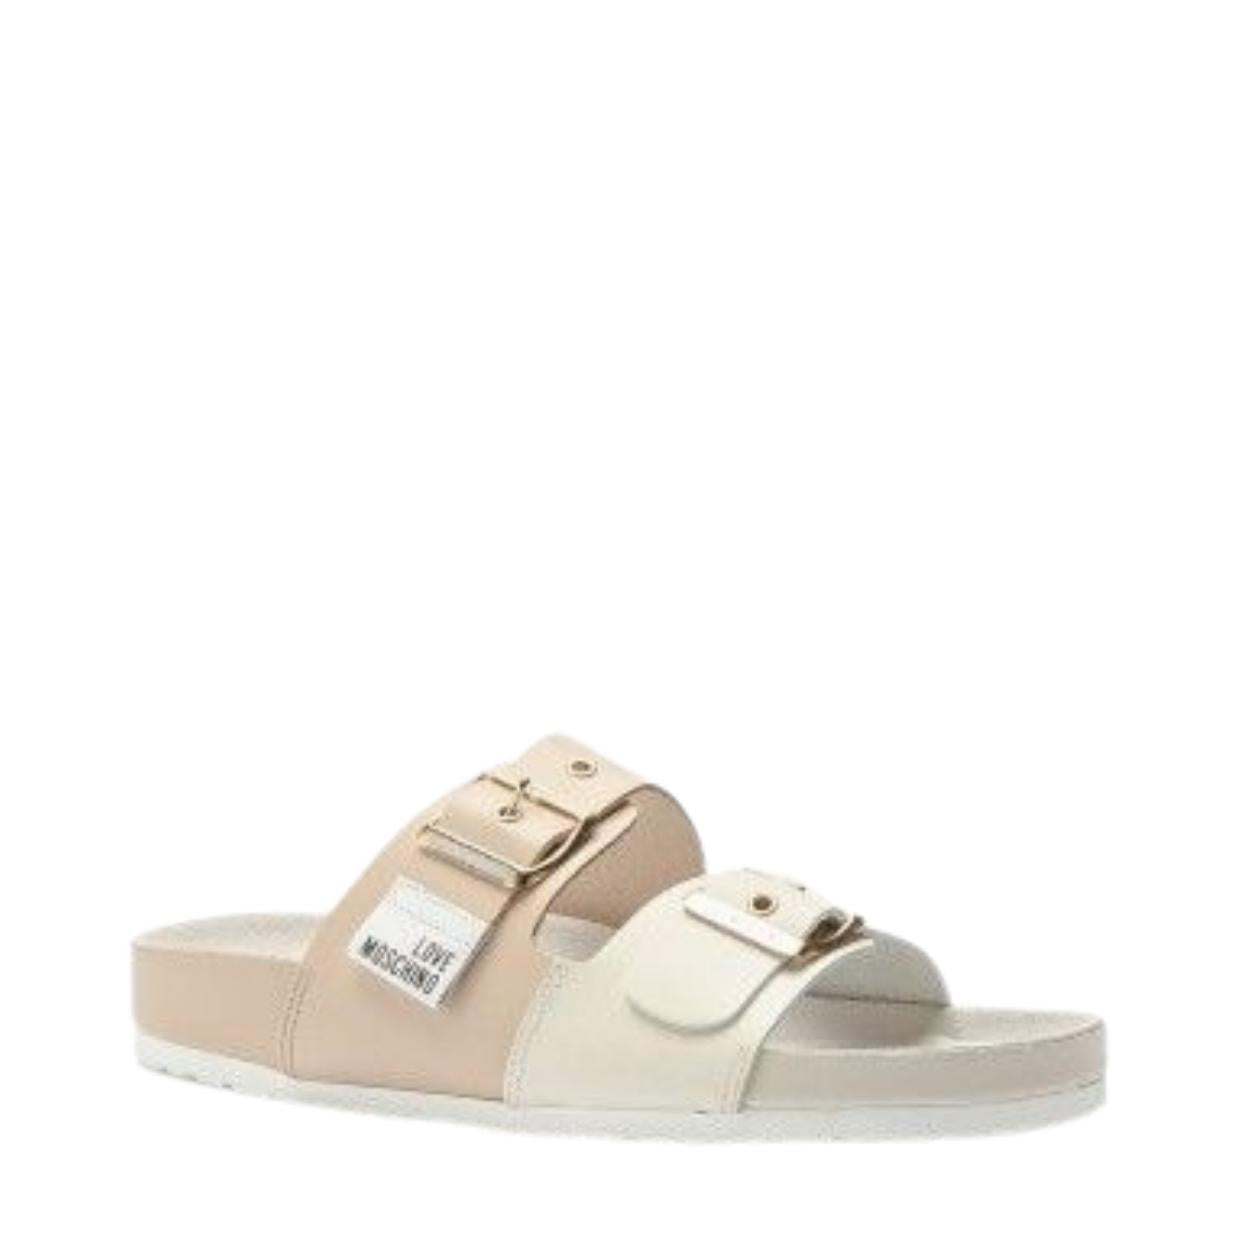 Love Moschino Two Buckle Beige Sandals